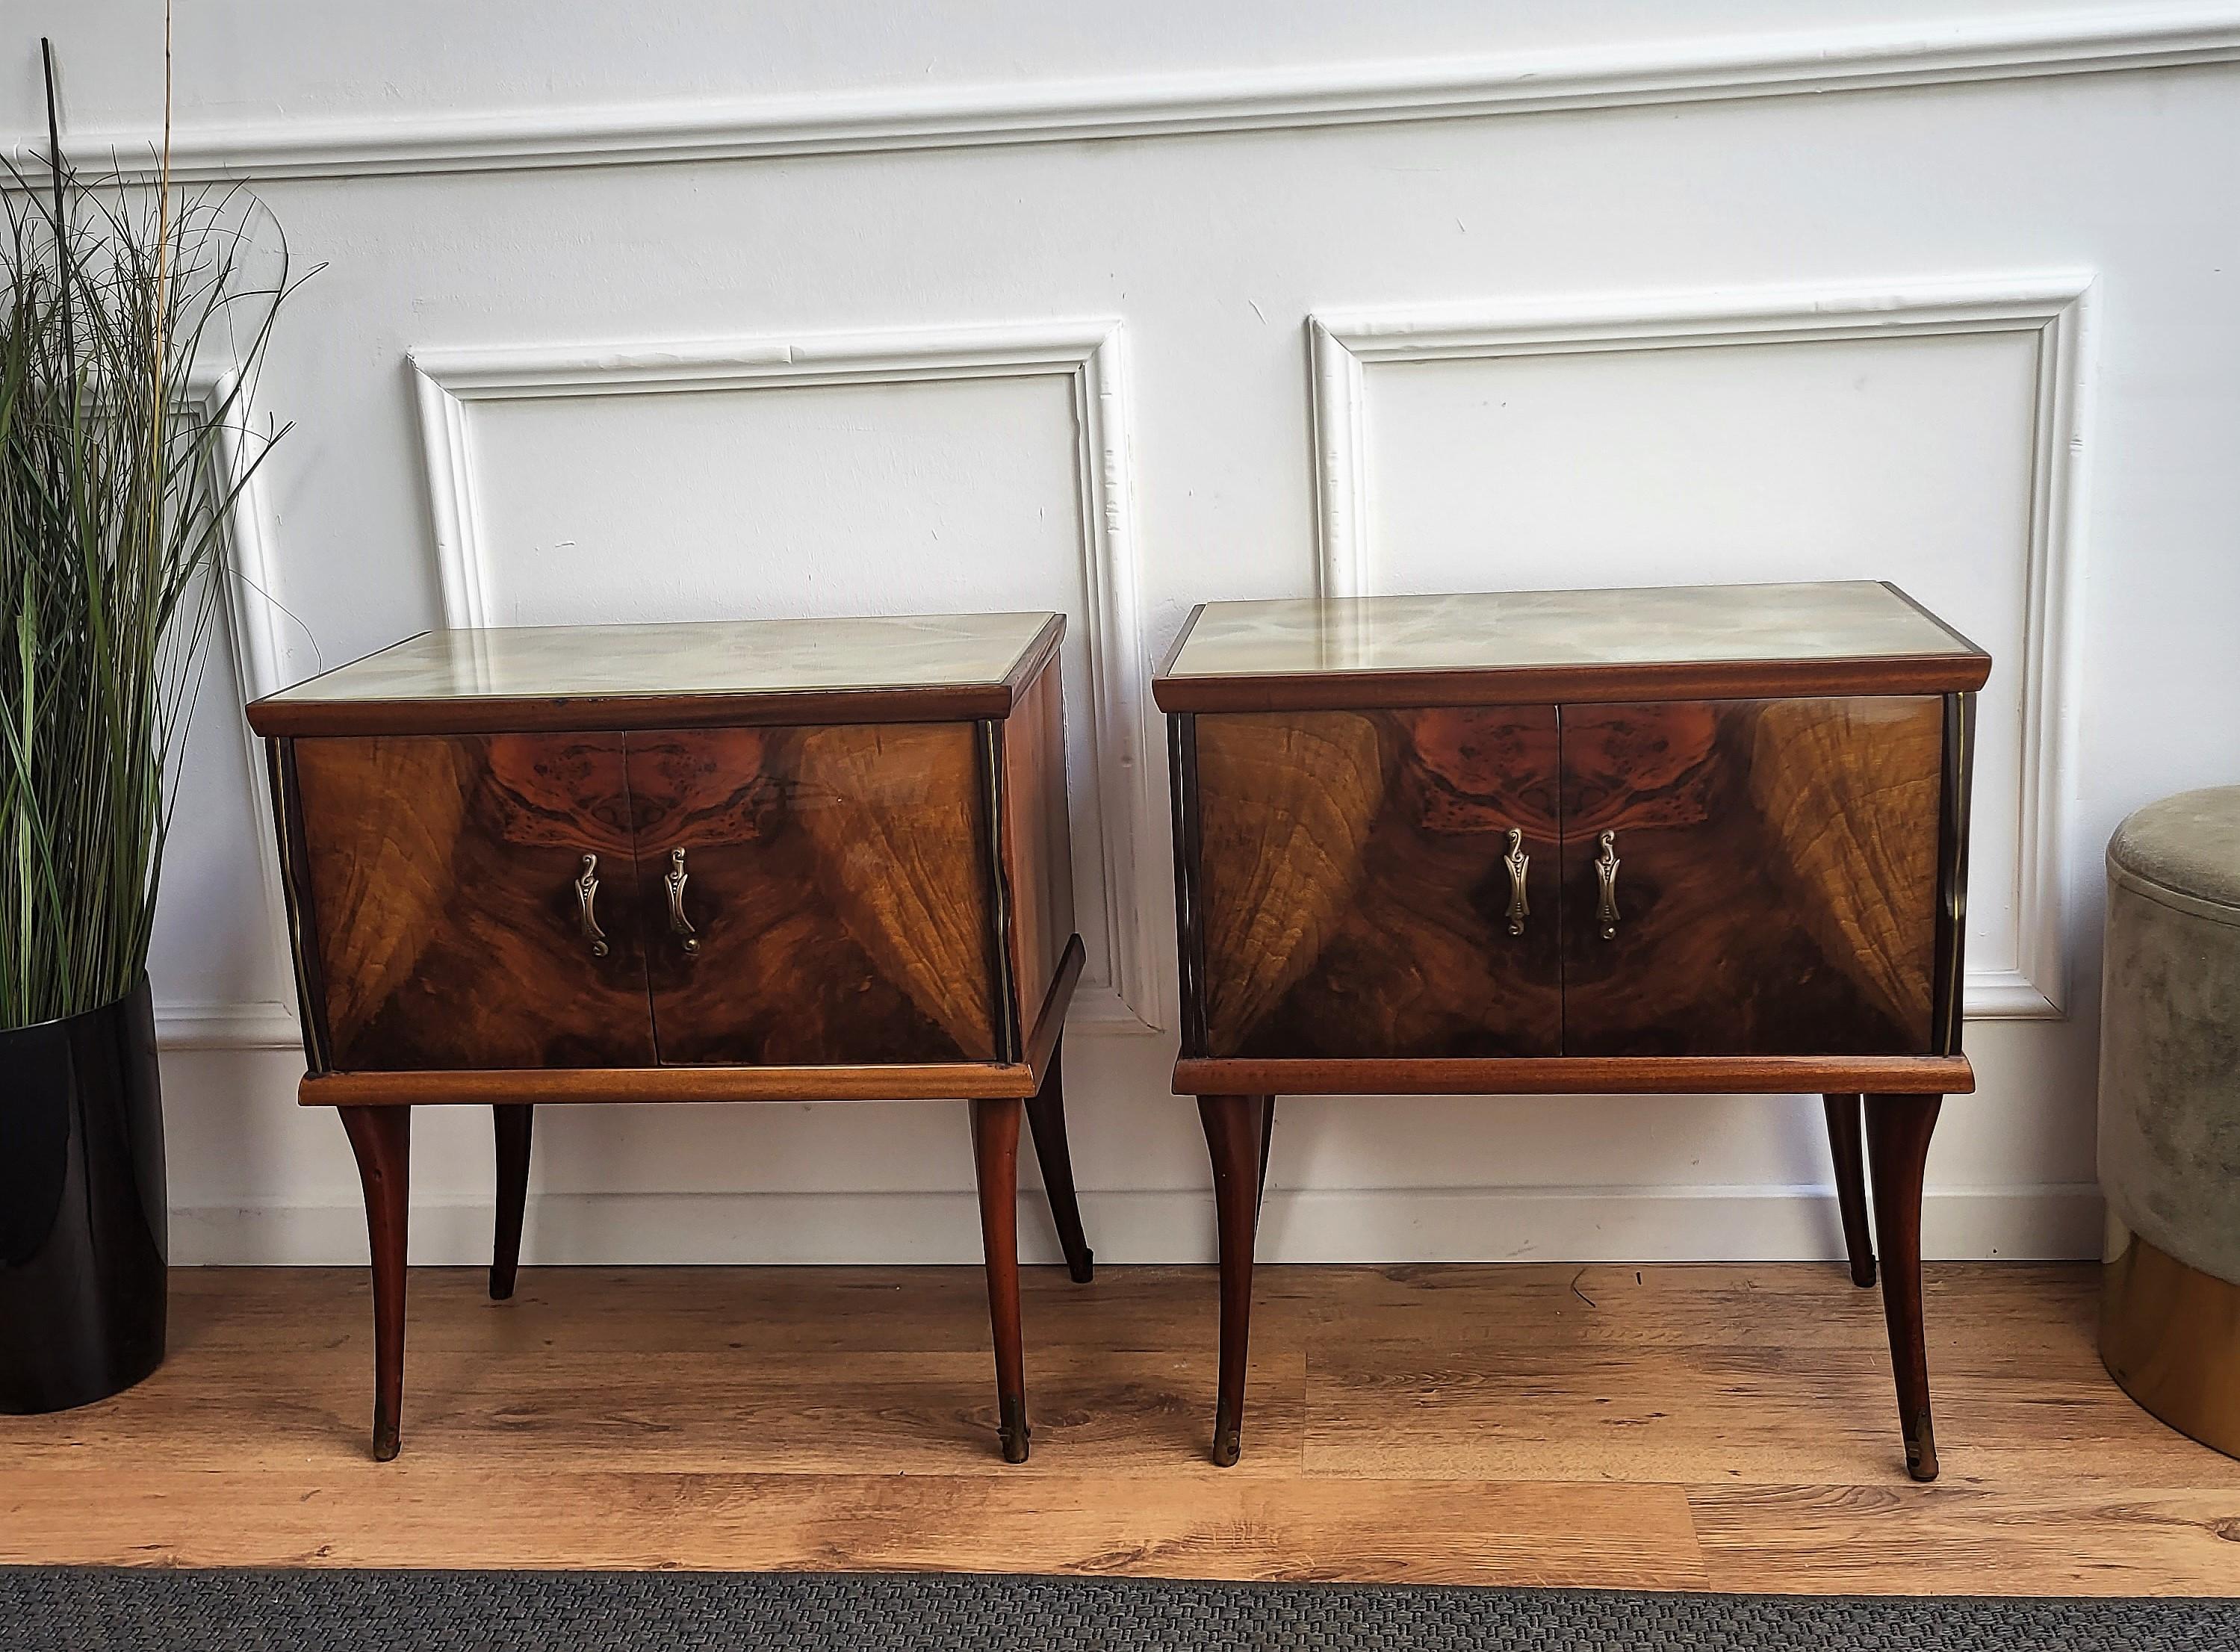 Very elegant and refined Italian 1950s Mid-Century Modern, neoclassical and empire style, in typical Art Deco design, pair of bedside tables with wood double front door, white marble top and wood veneer burl decors on the sides and doors, and brass